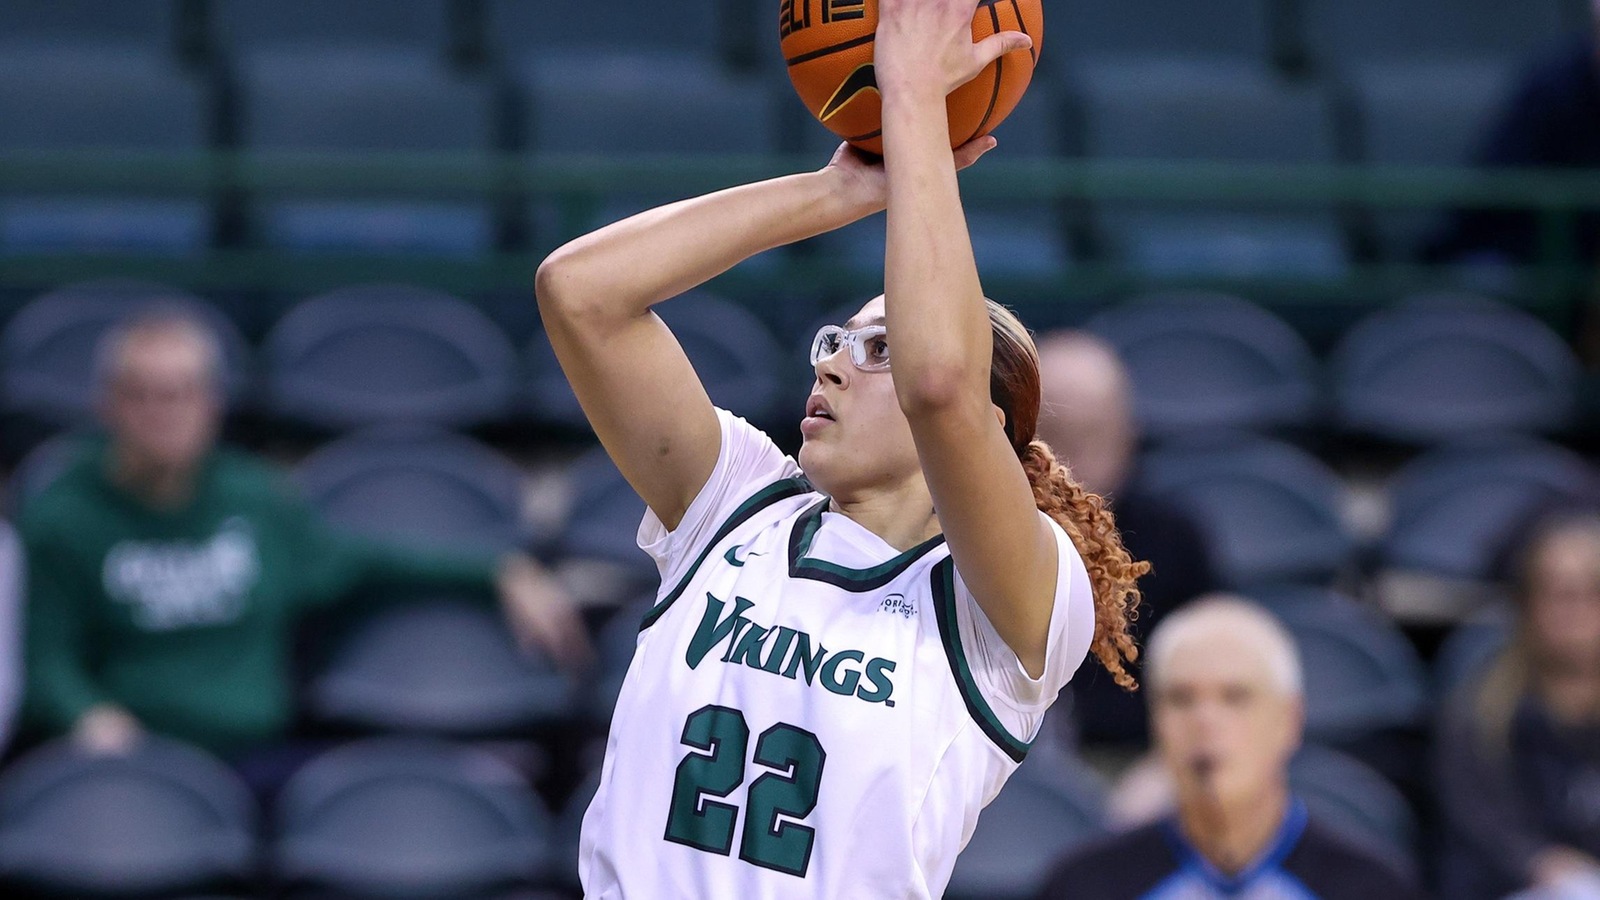 Cleveland State Women’s Basketball Earns 92-59 Victory Over IUPUI